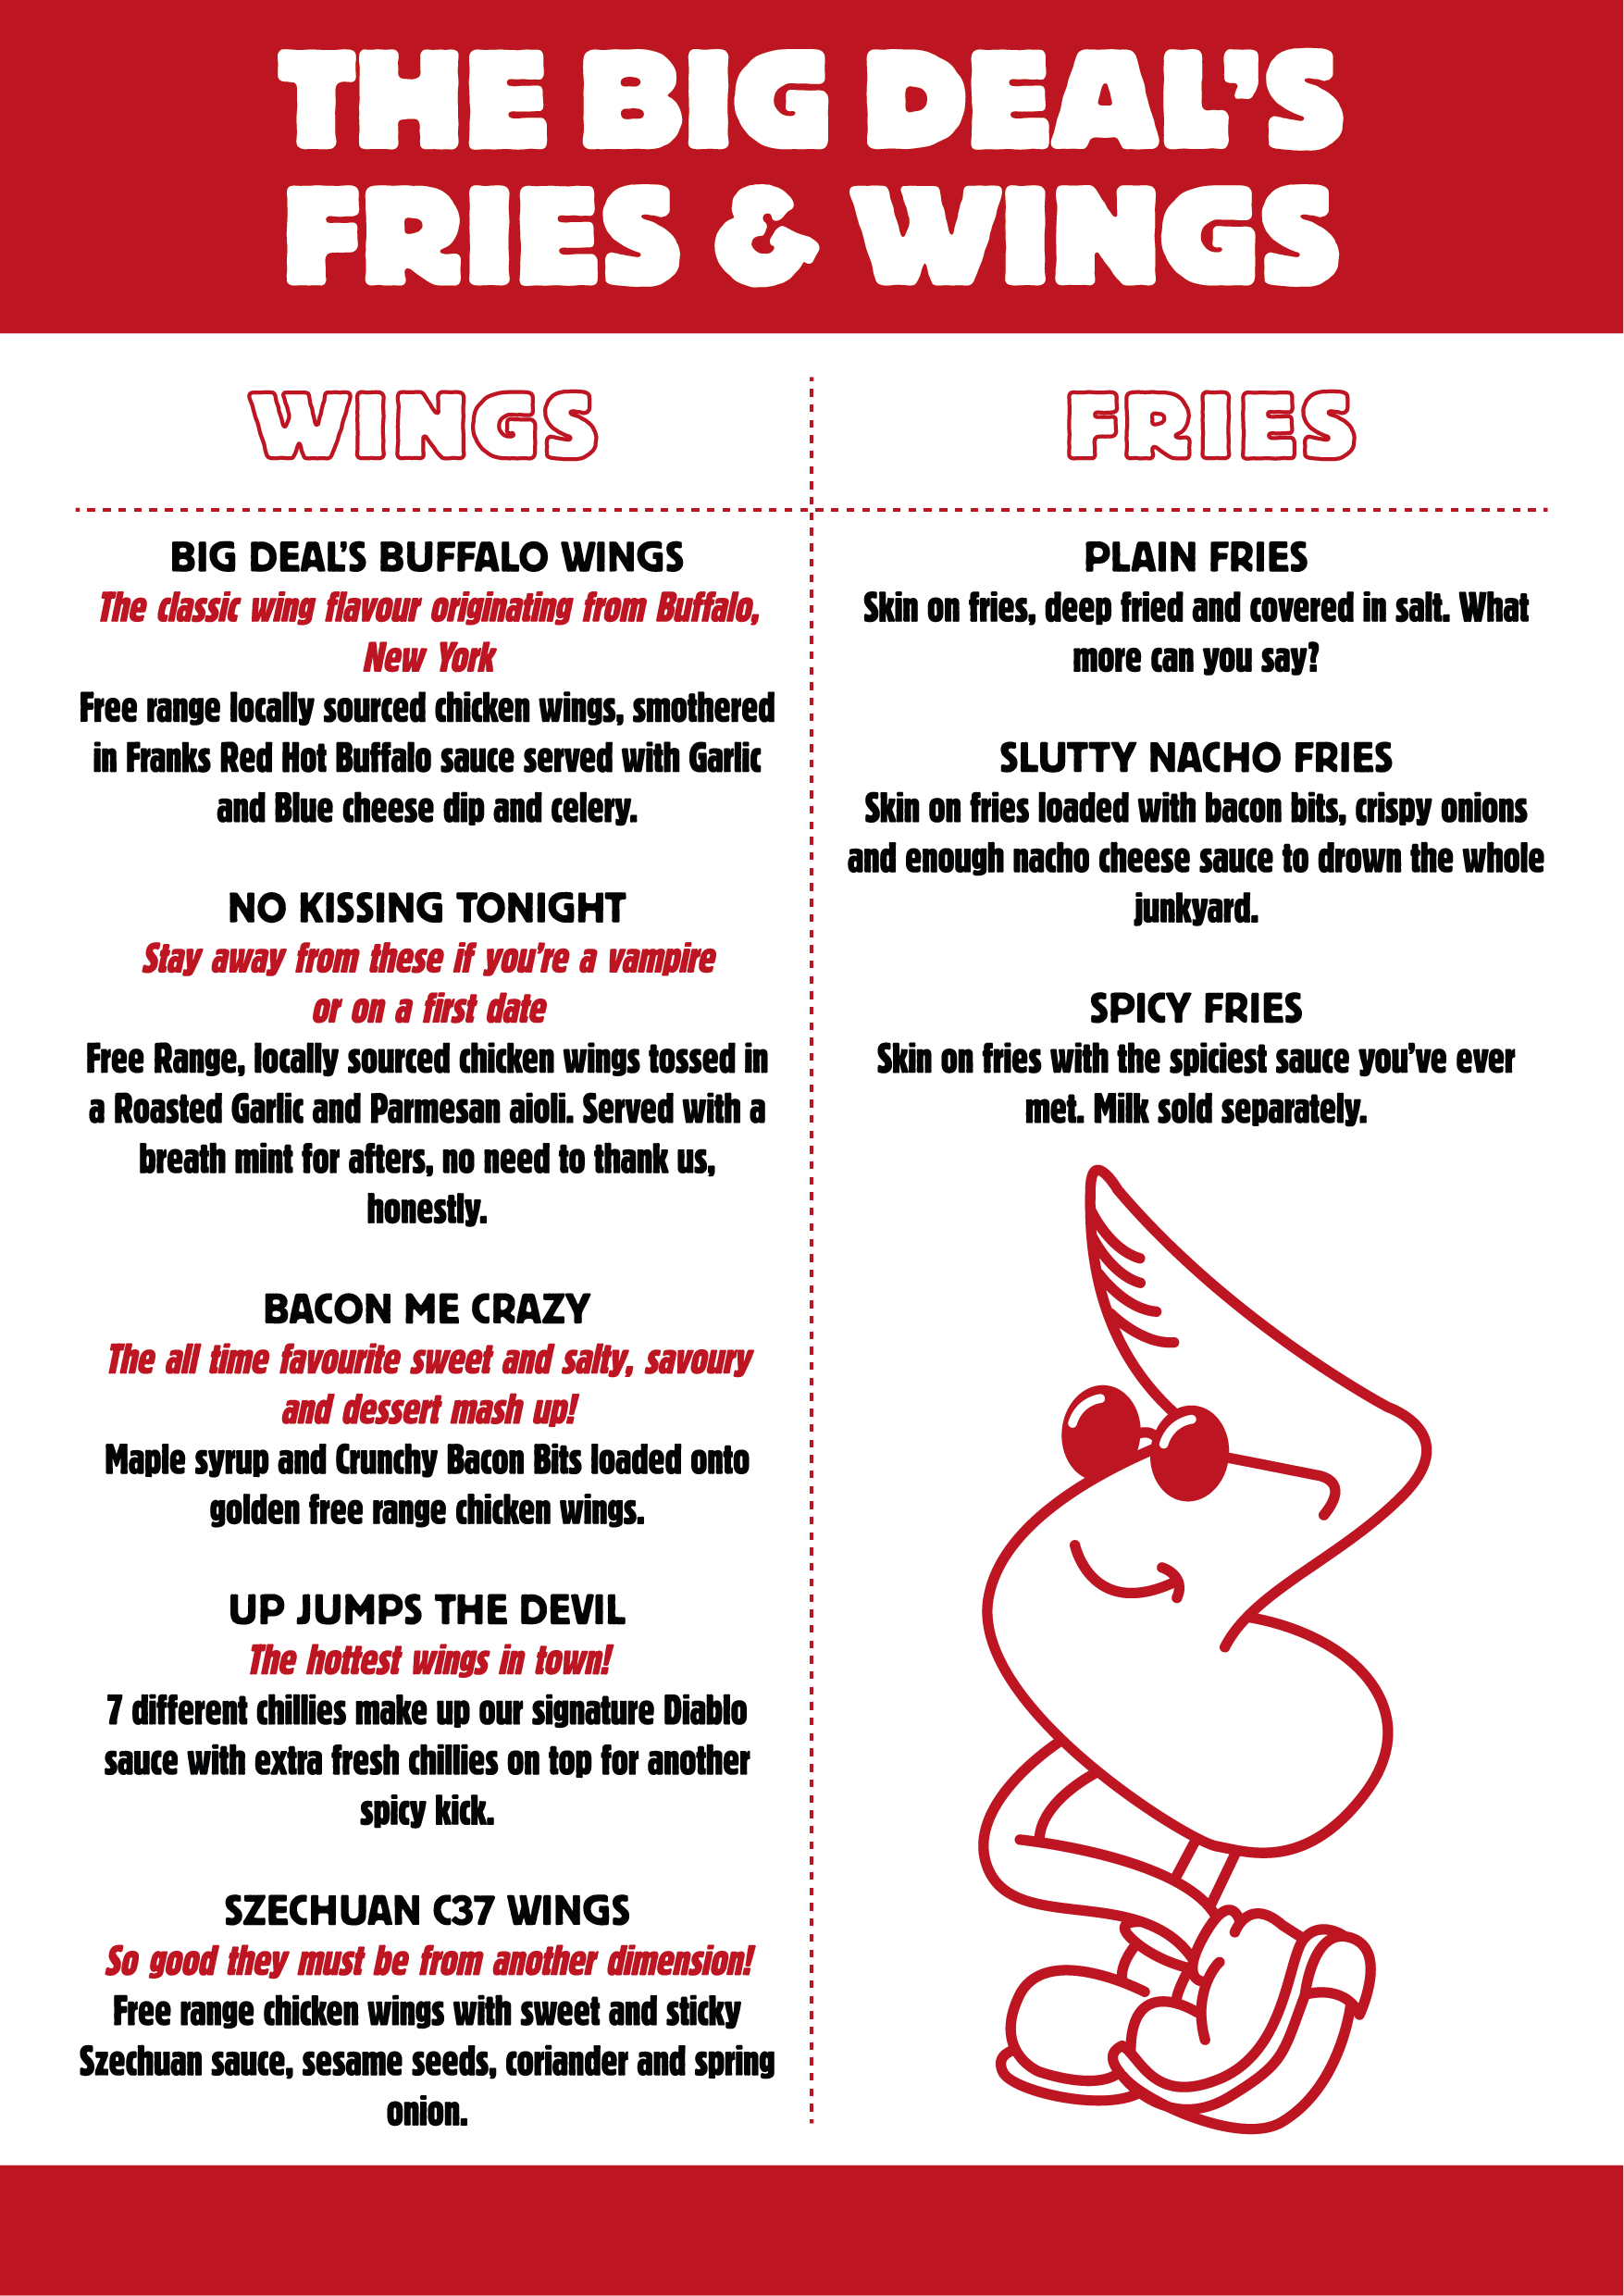 A mockup of a fast food menu with columns showing Wings and Fries